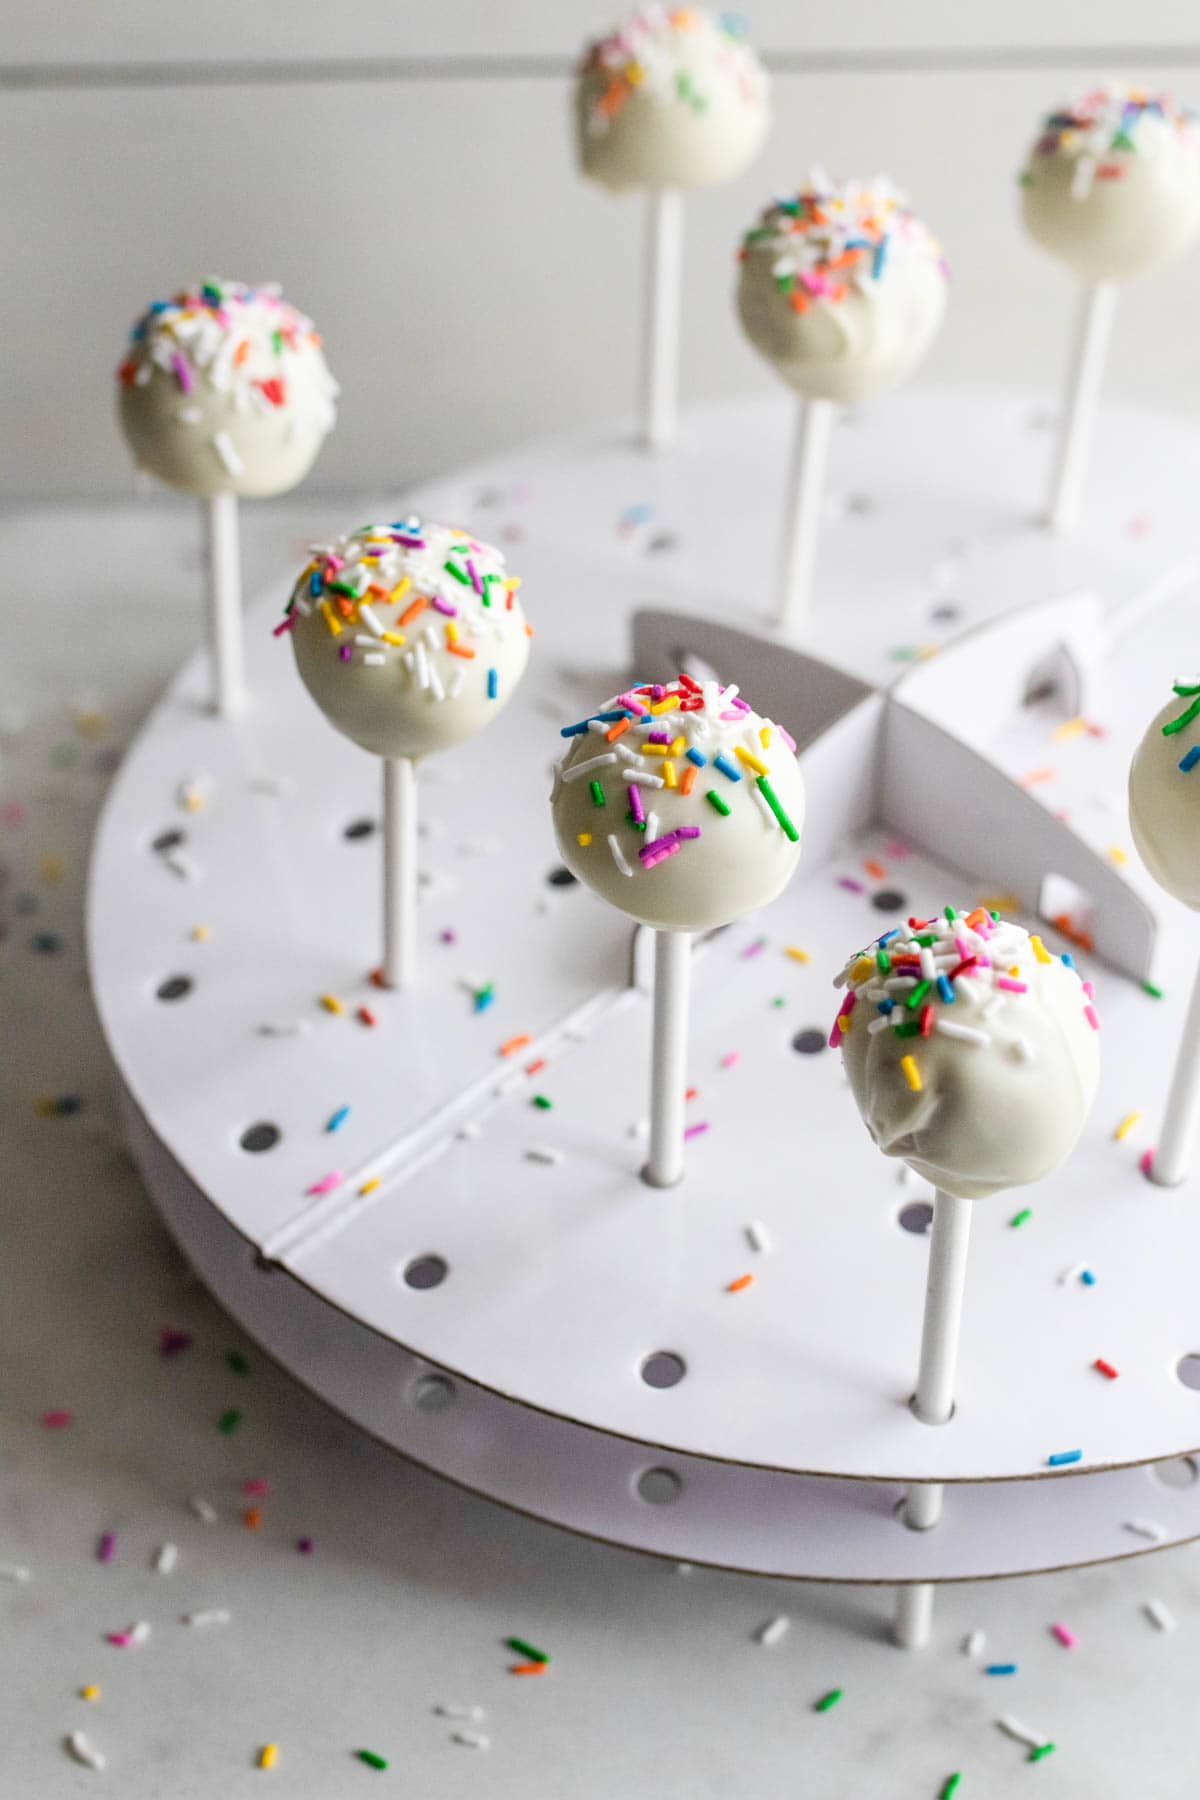 Cake pops inserted into a cake pop stand.